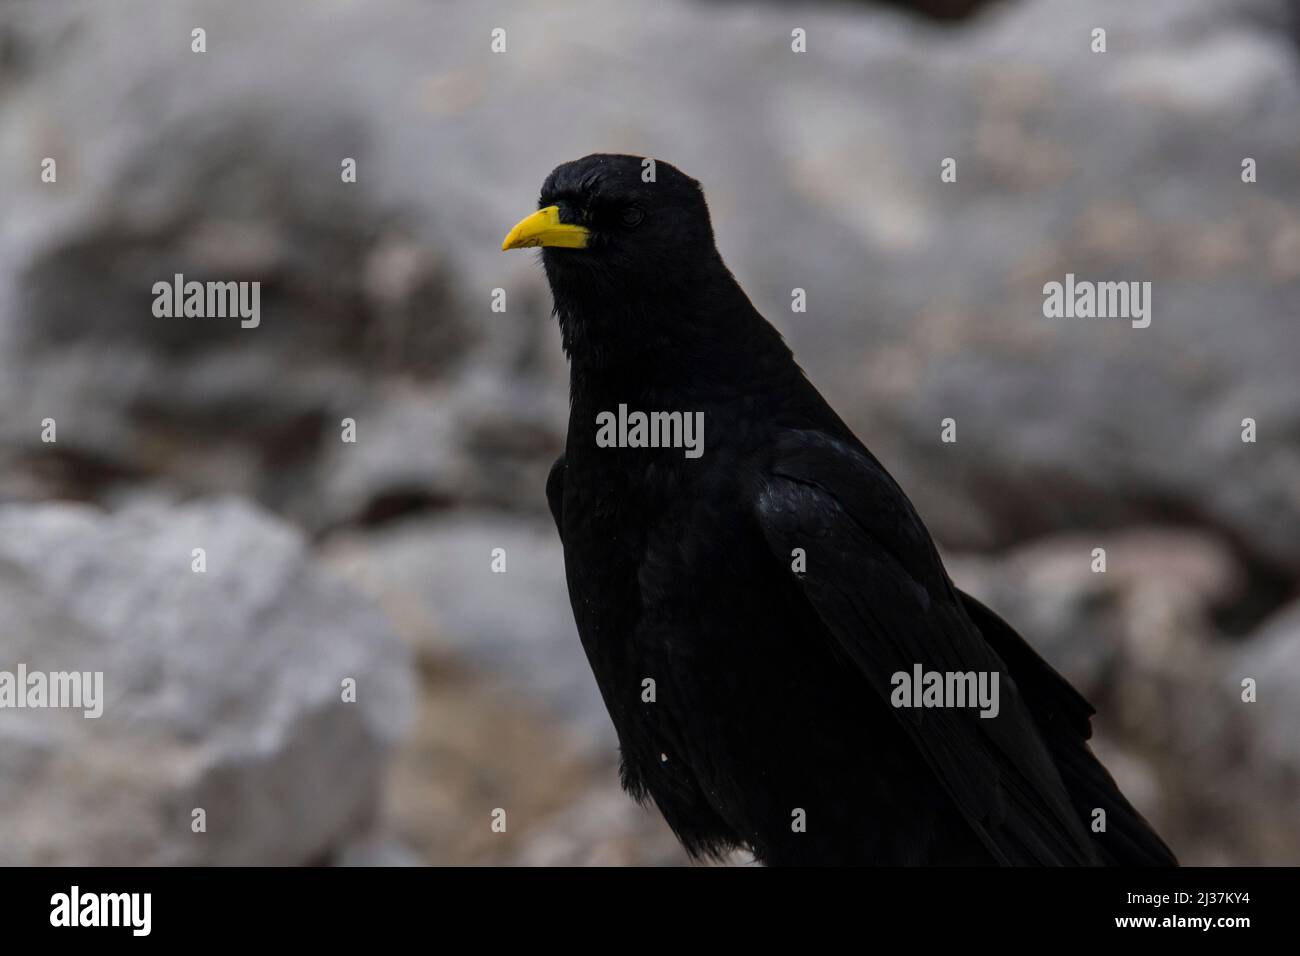 Carrion crow with a yellow beak stands curious on a rock observing Stock Photo